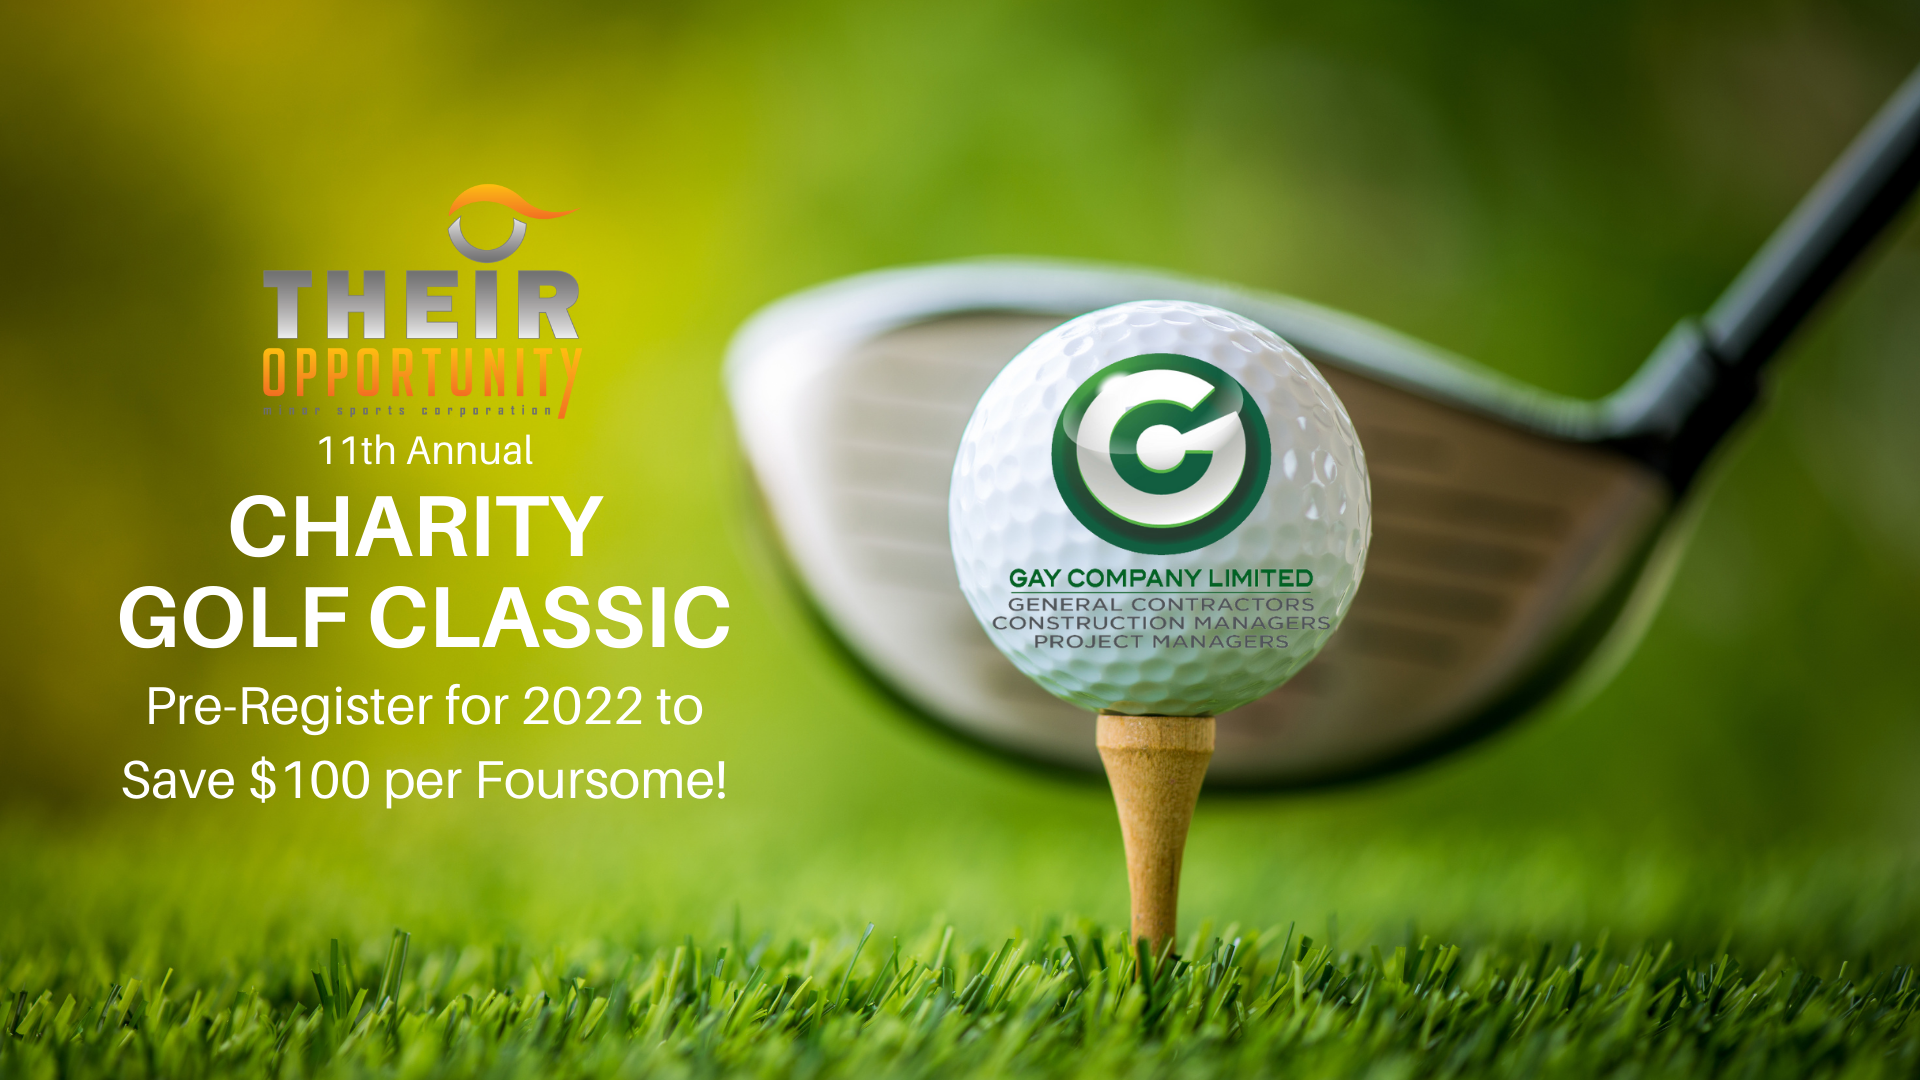 2022 Their Opportunity Golf Classic Presented by Gay Company Limited